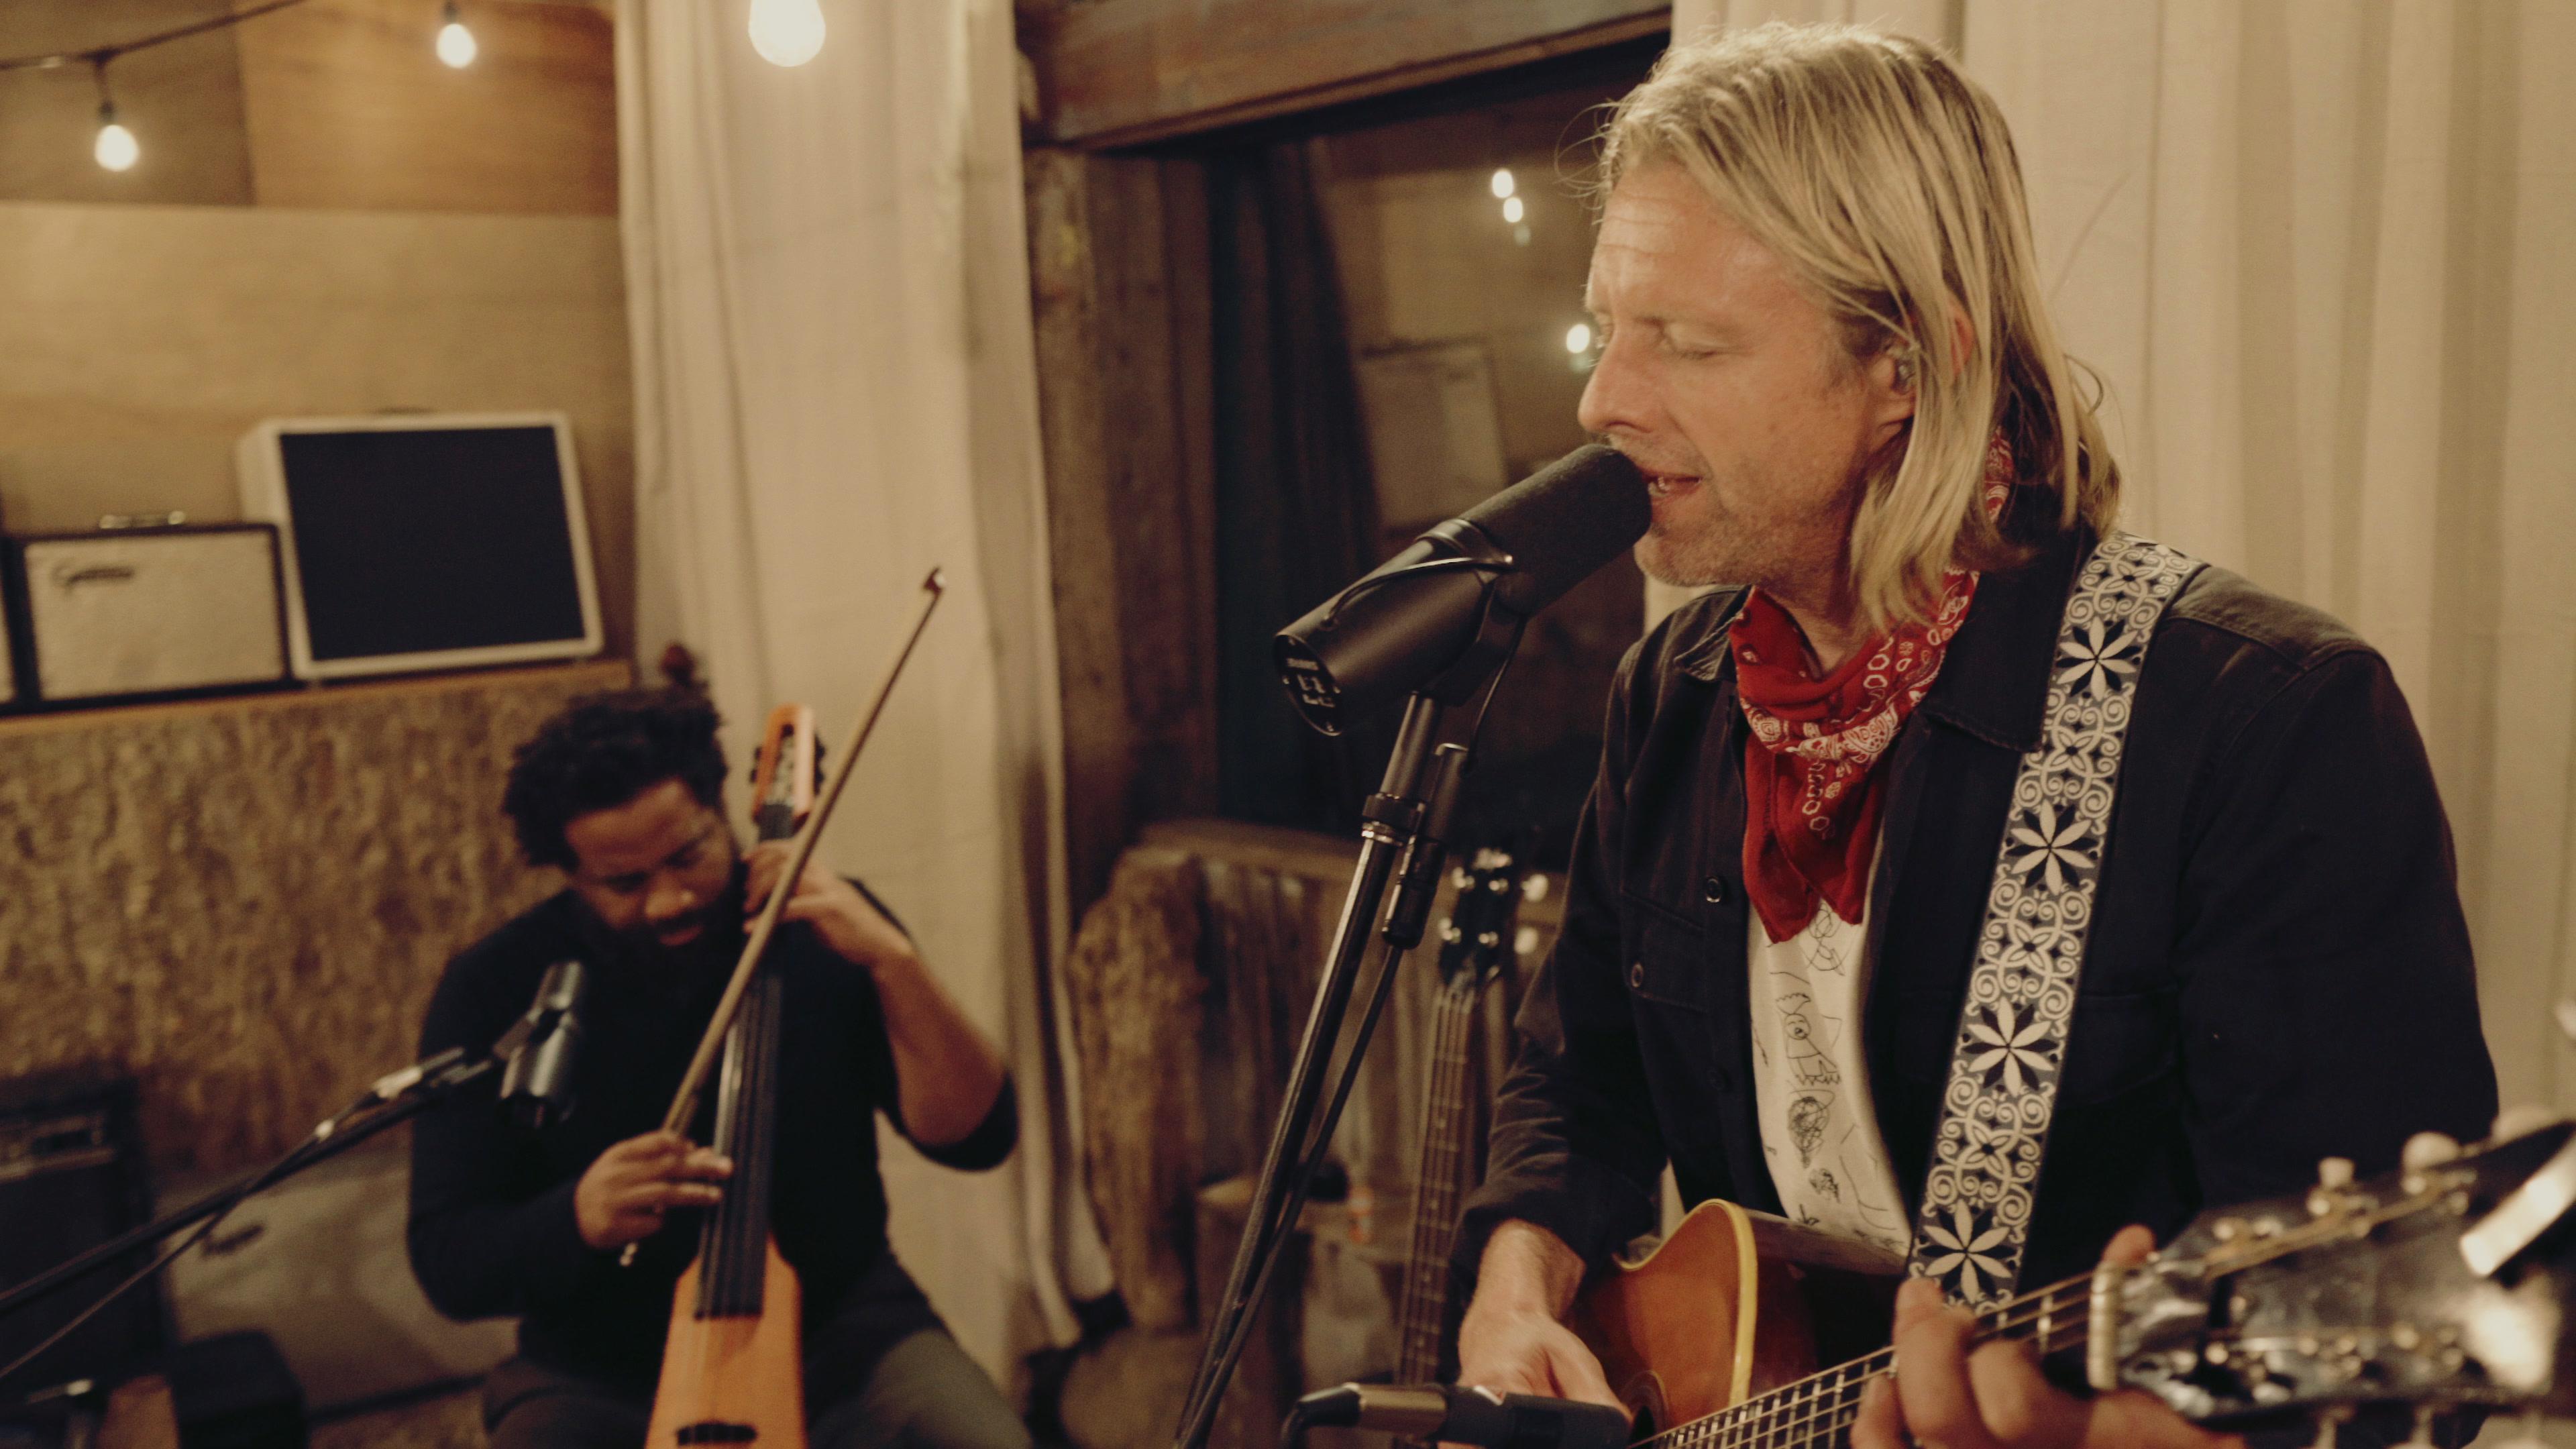 Jon Foreman - The Cure For Pain (Live At Melody League Studios, San Diego, CA/2021)